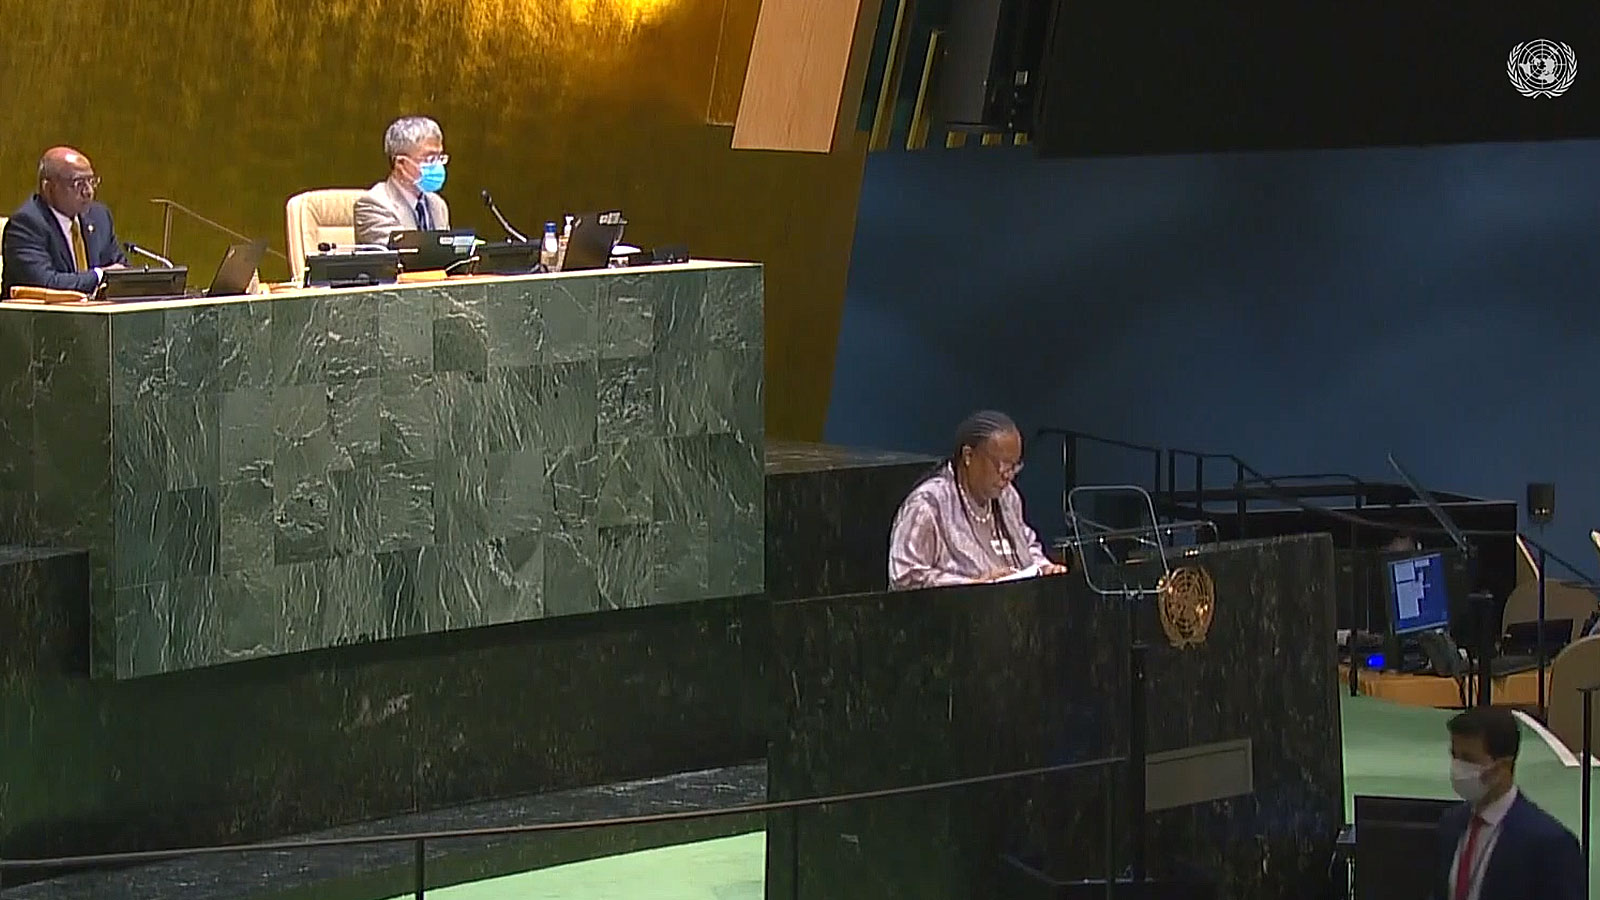 UN General Assembly: Reparations, racial justice and equality for people of African descent